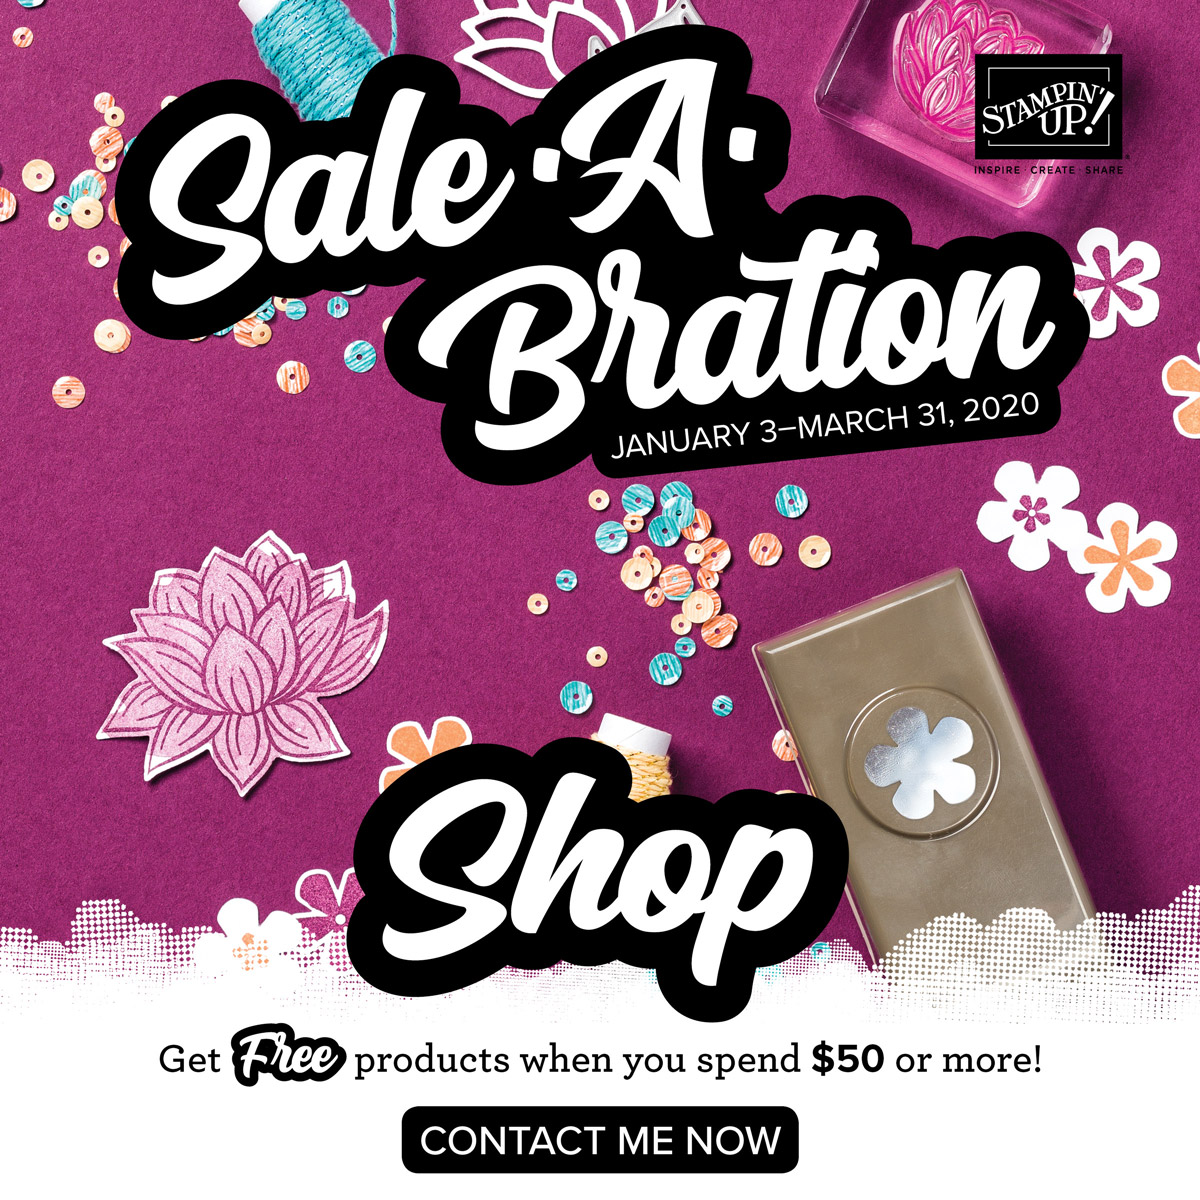 Beginning January 3, 2020 with a min. $50.00 order you can choose 1 item from the Sale-a-bration Brochure for FREE. Details on my blog here: https://wp.me/p59VWq-aF6